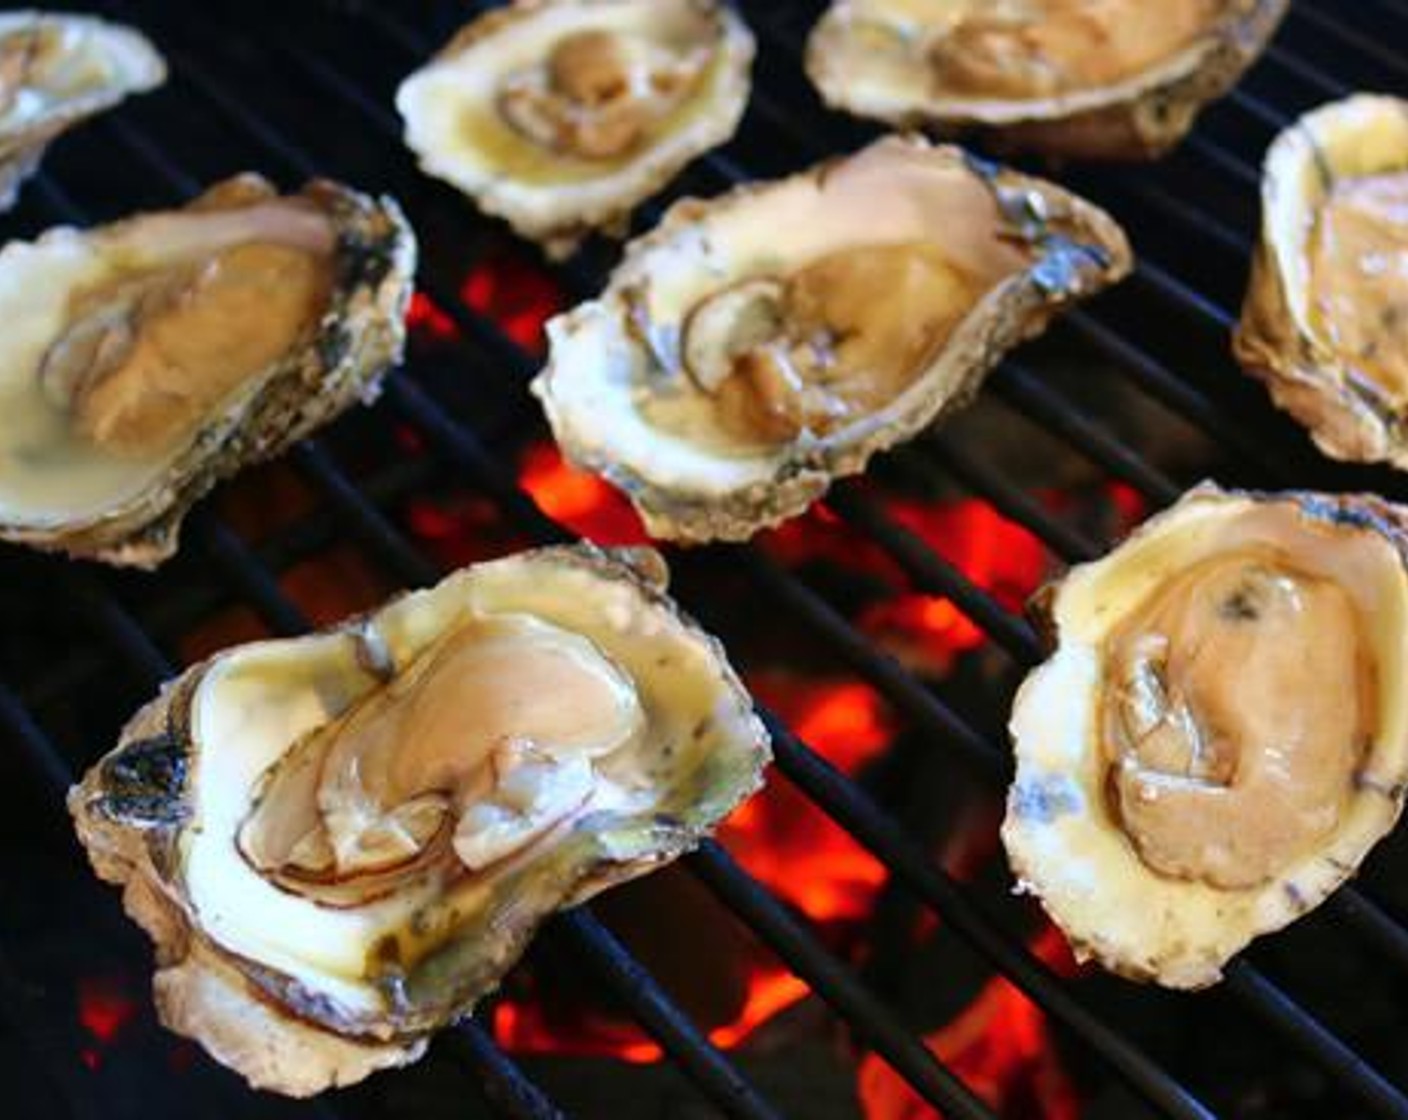 step 4 Place freshly shucked Oysters (12) directly on grill grate and cook for 3-4 minutes just until the liquid in the oysters starts to bubble.